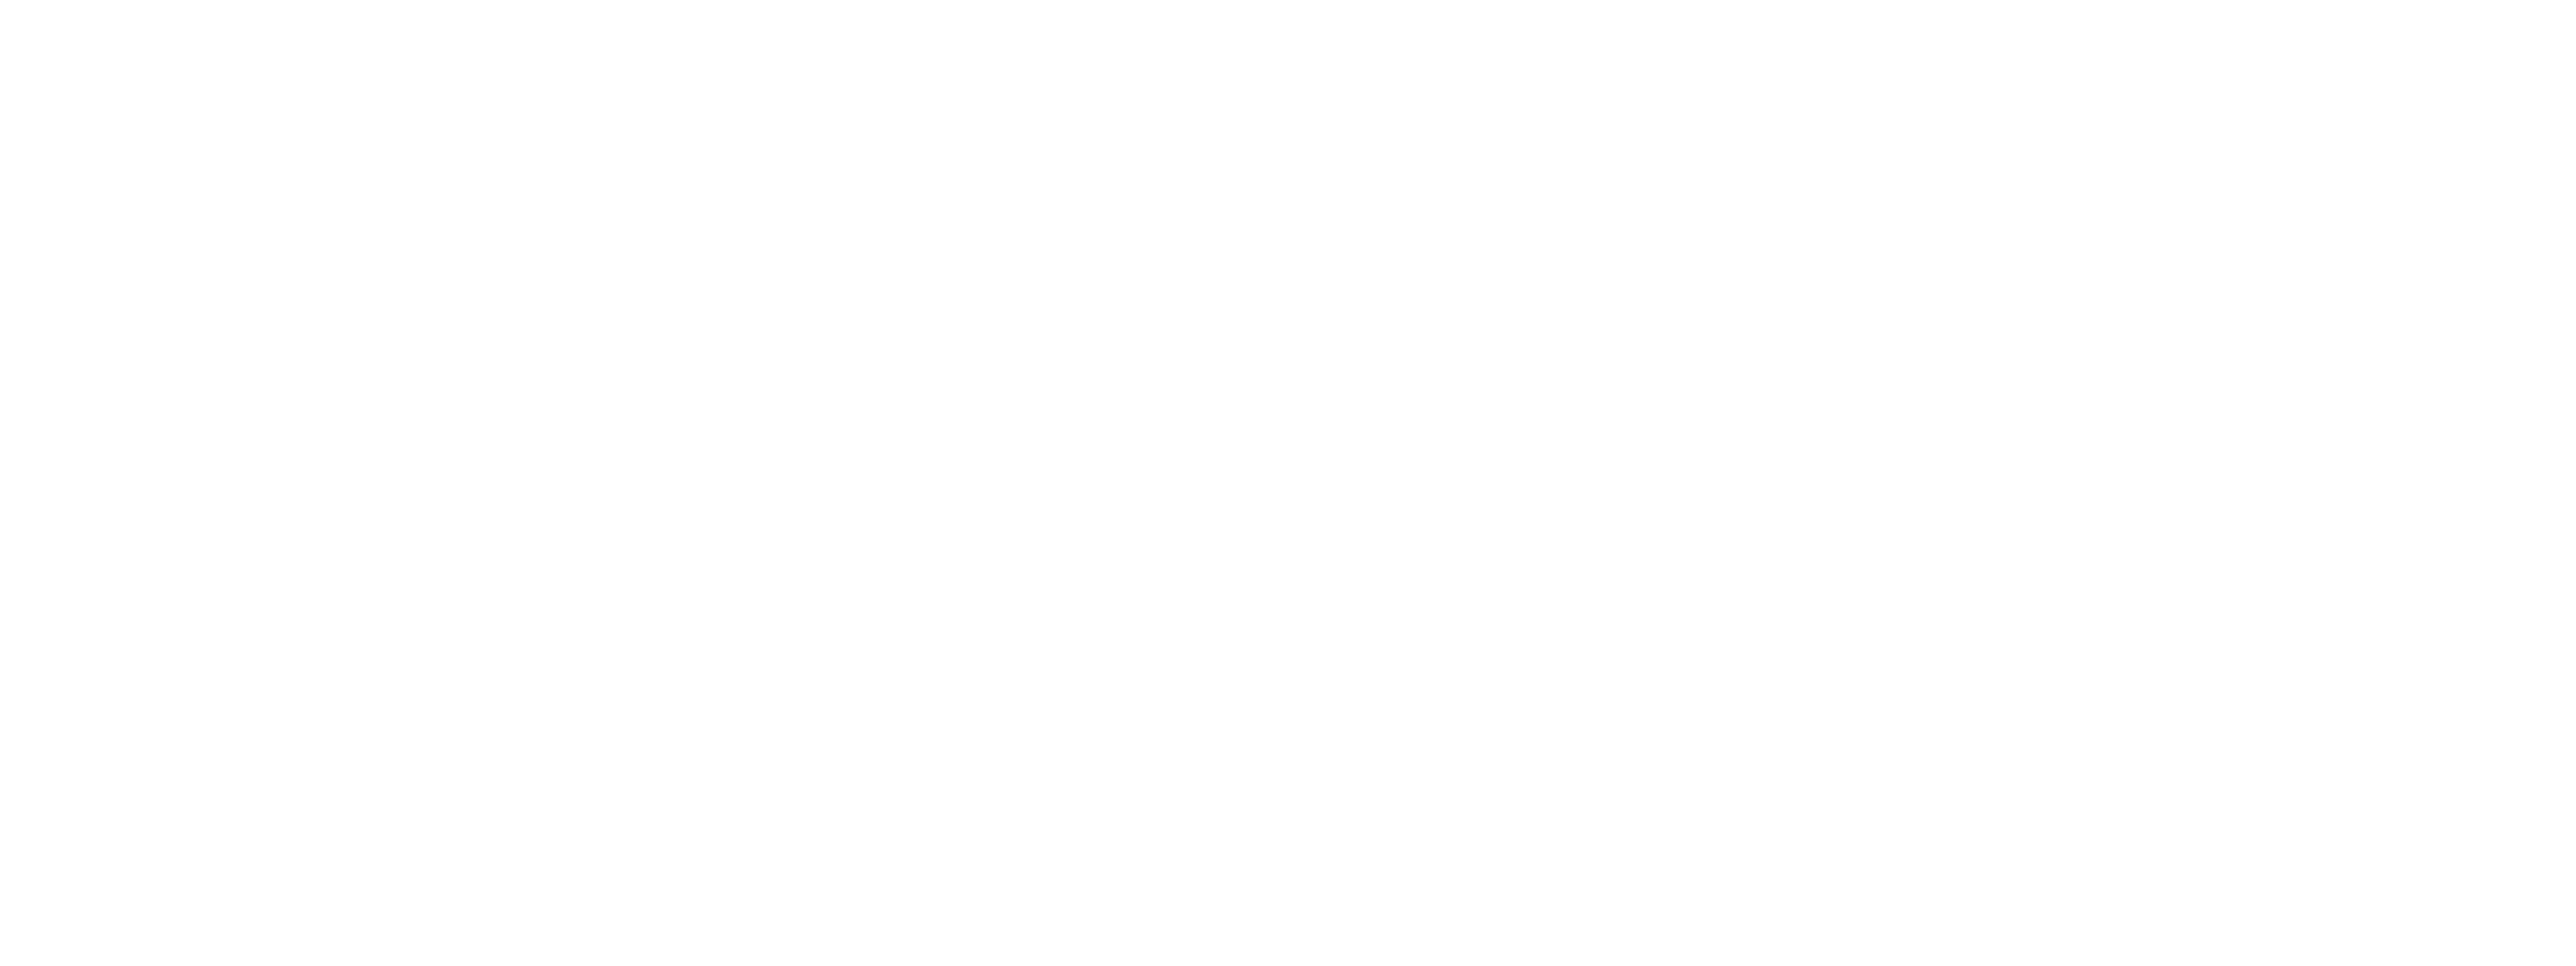 Rooted in Trophy